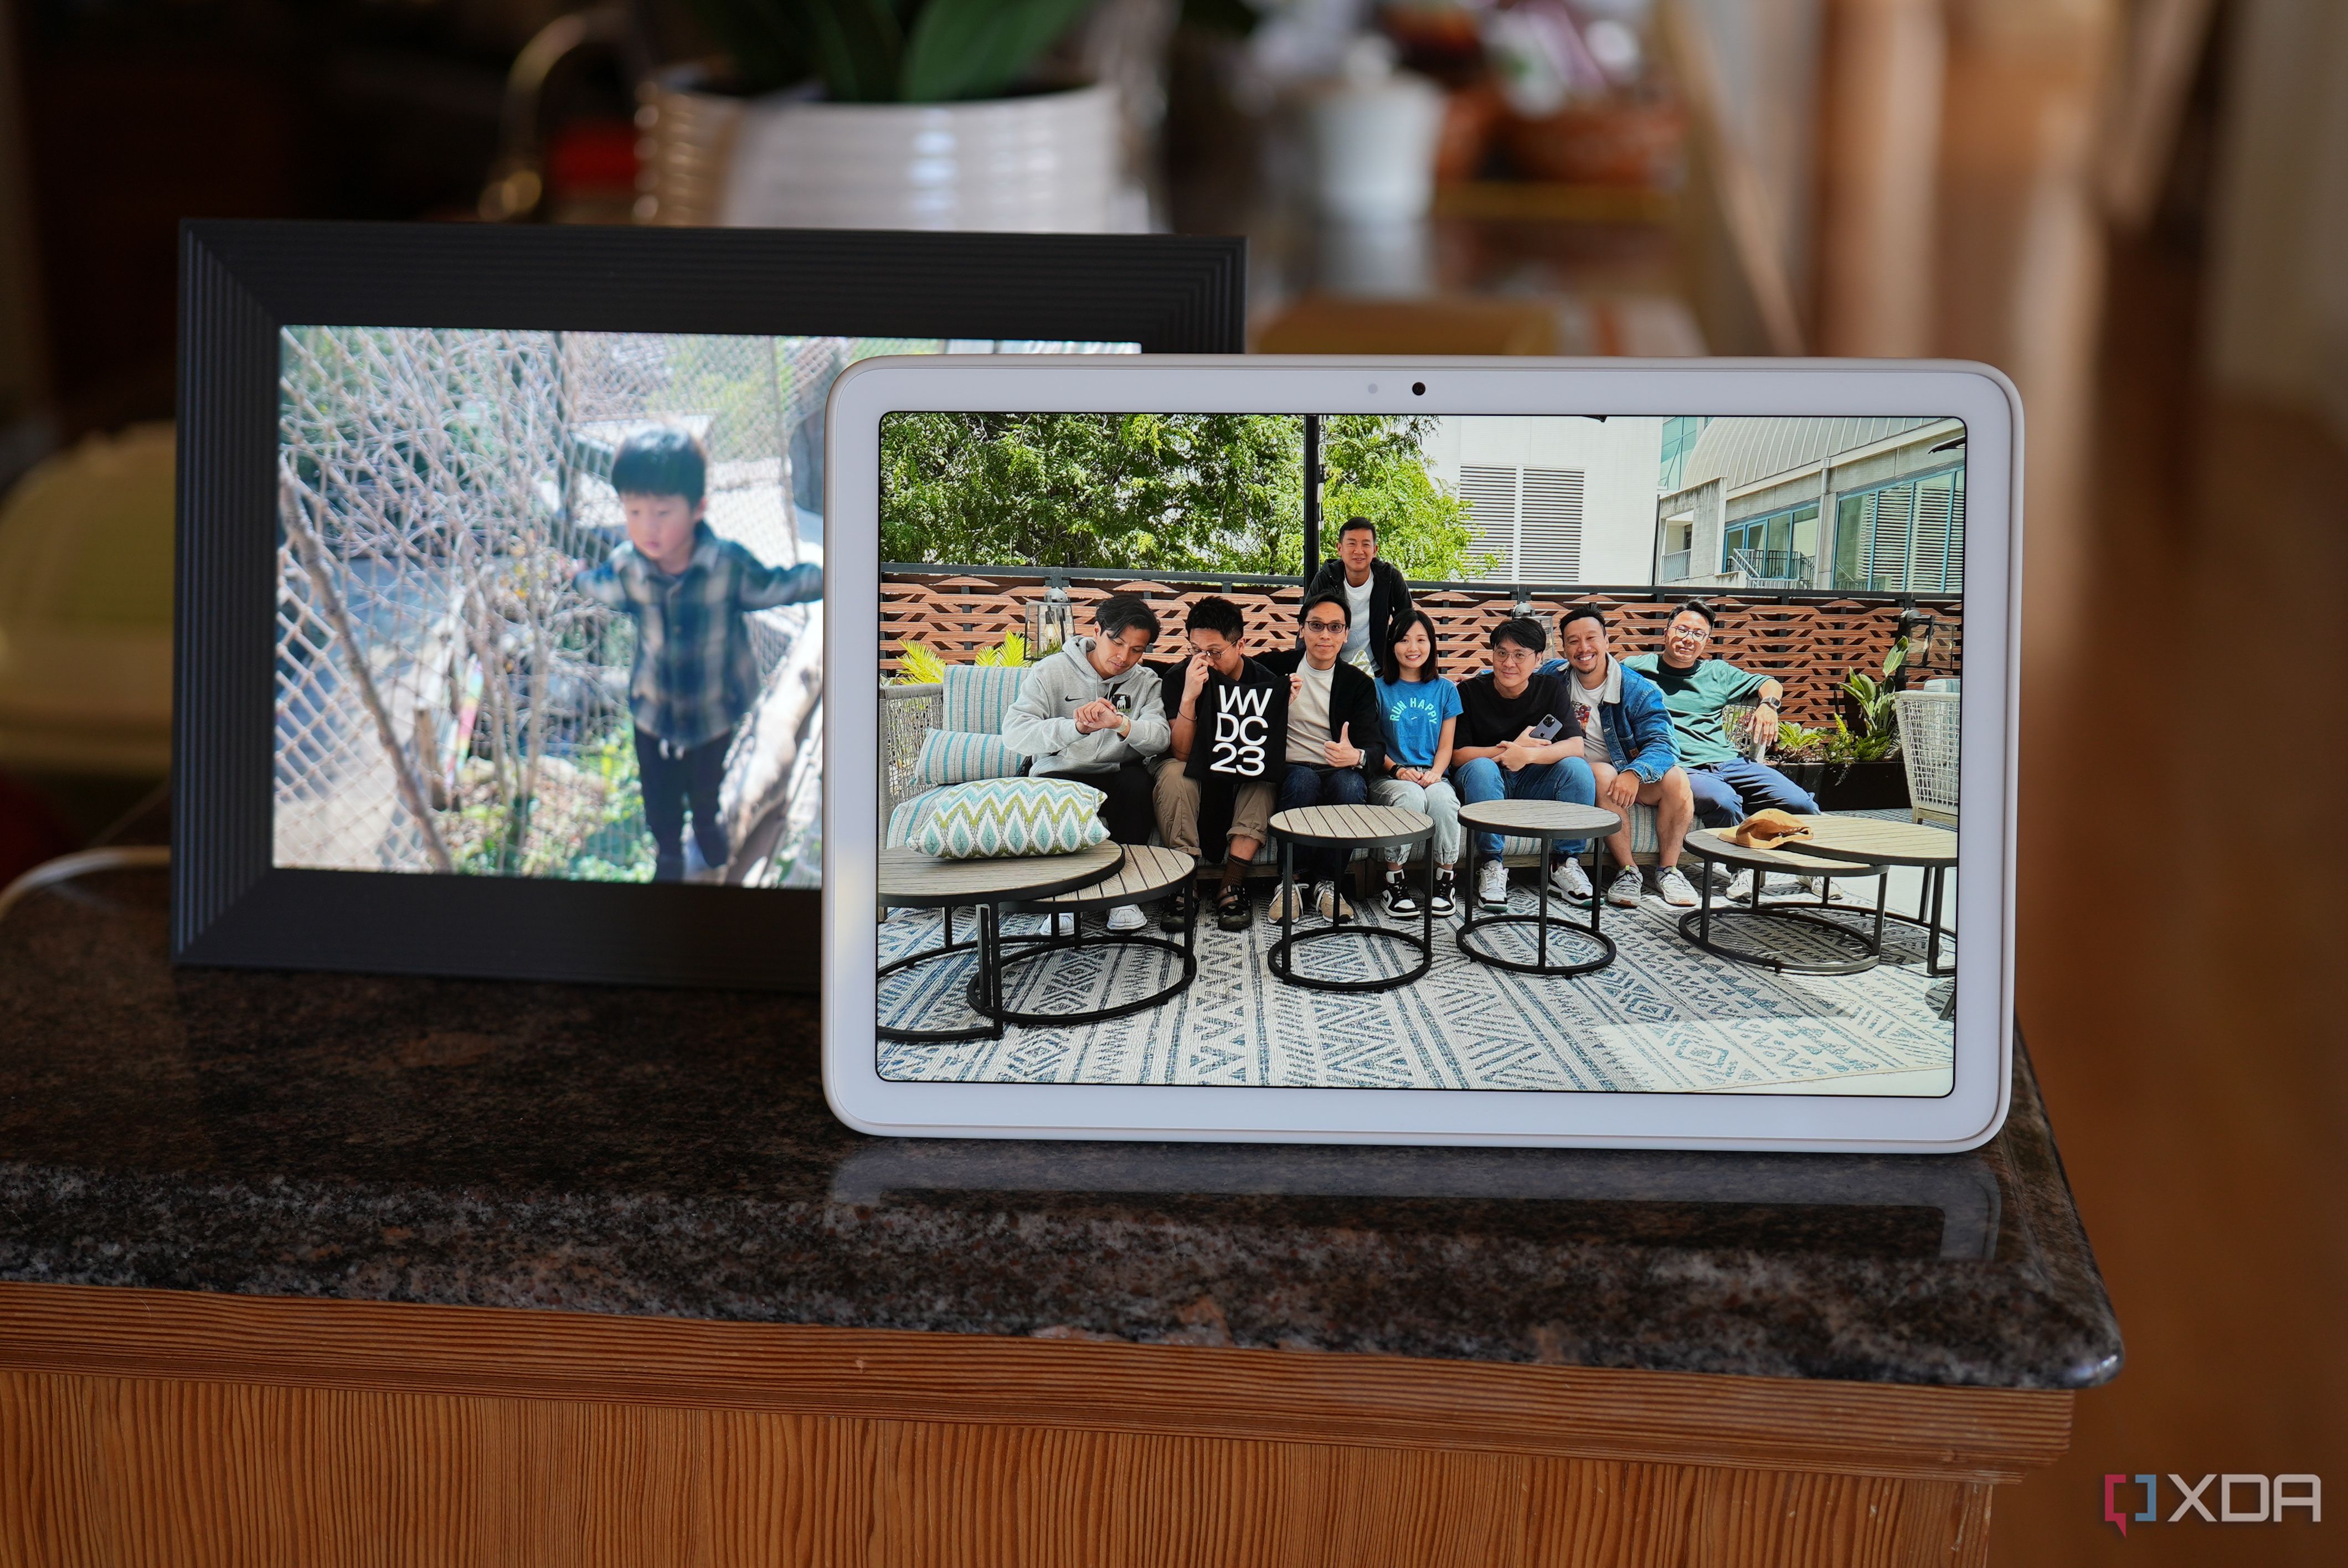 The Pixel tablet as a digital photo frame